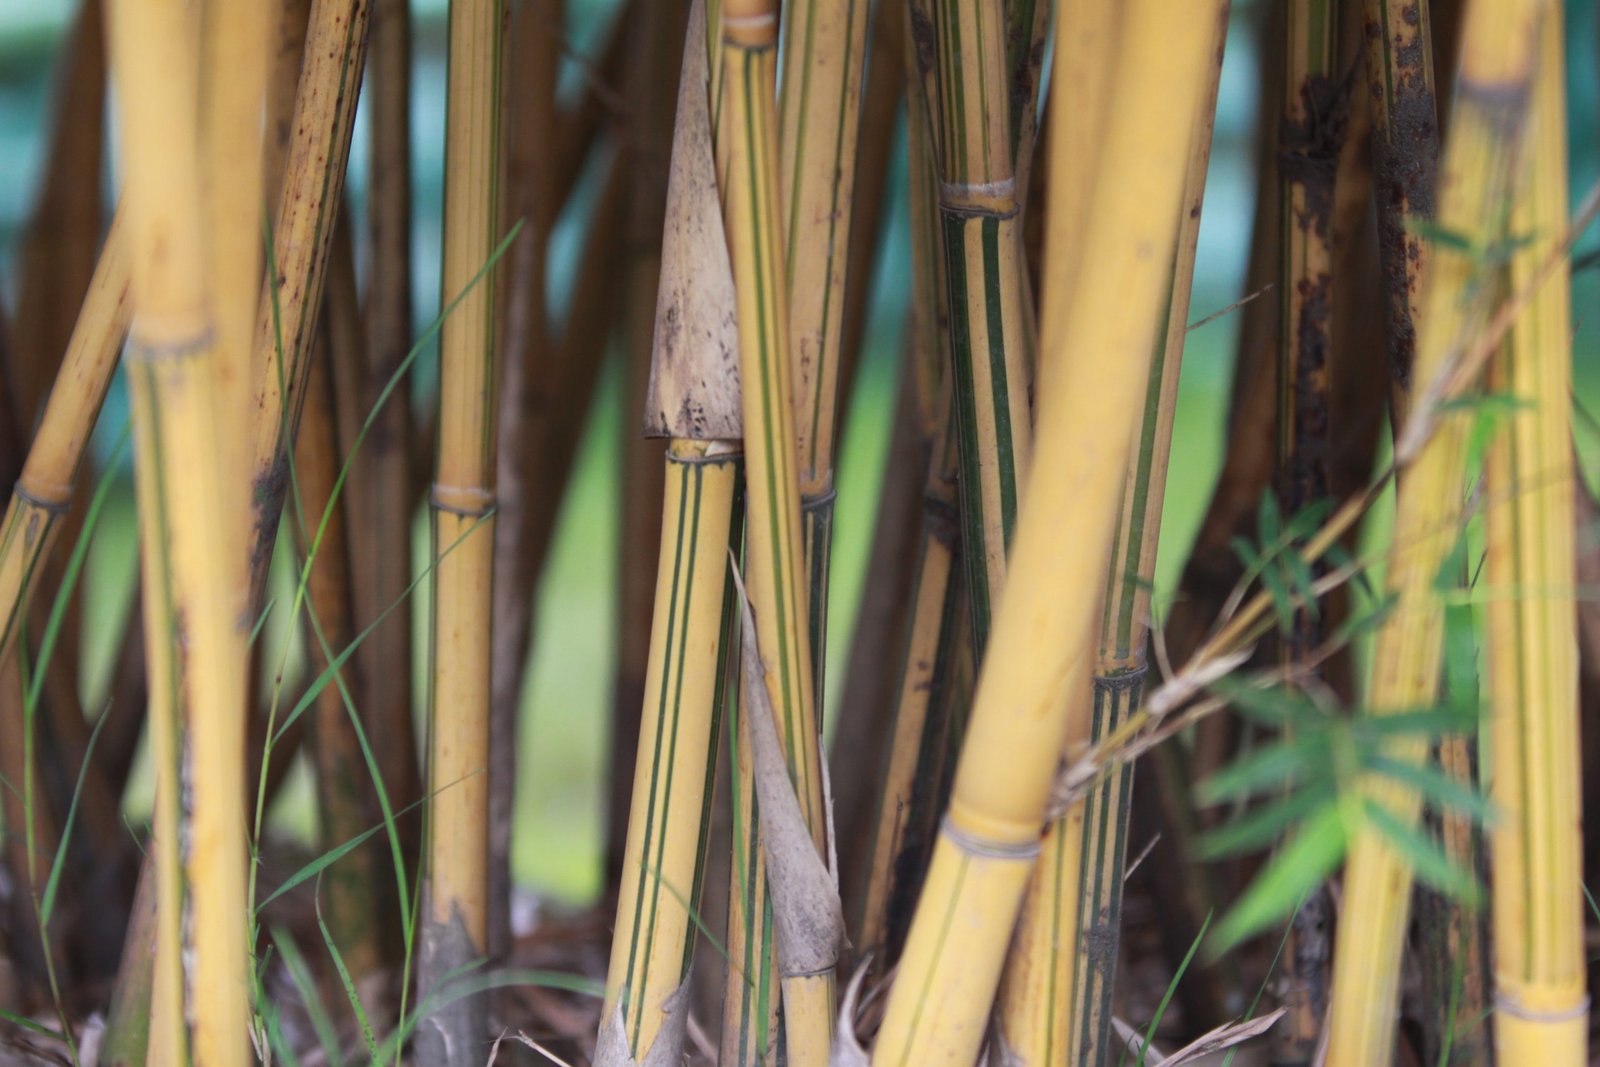 Yellow bamboo forest